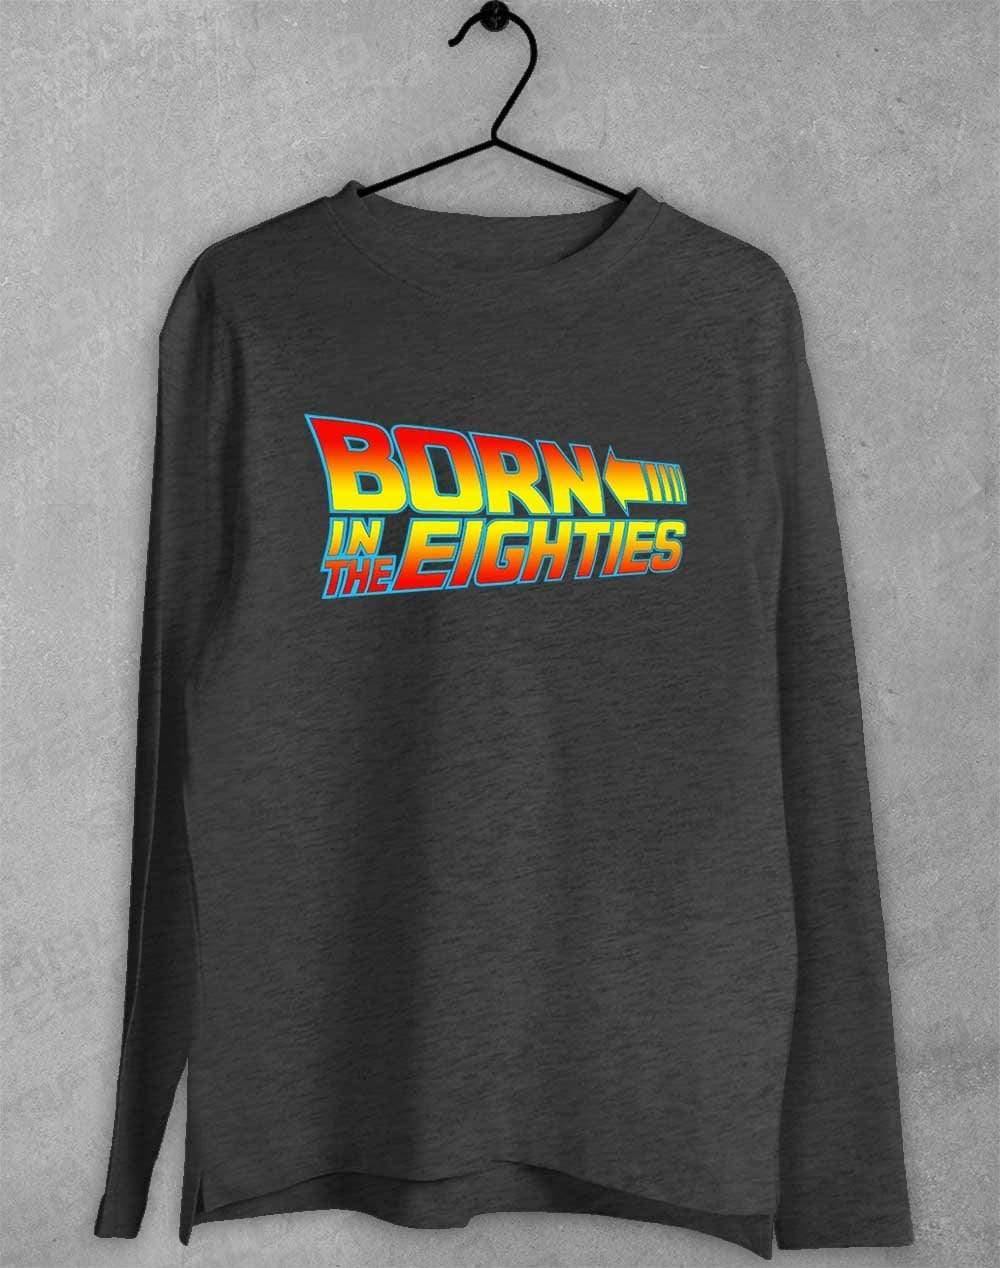 Born in the... (CHOOSE YOUR DECADE!) Long Sleeve T-Shirt 1980s - Dark Heather / S  - Off World Tees